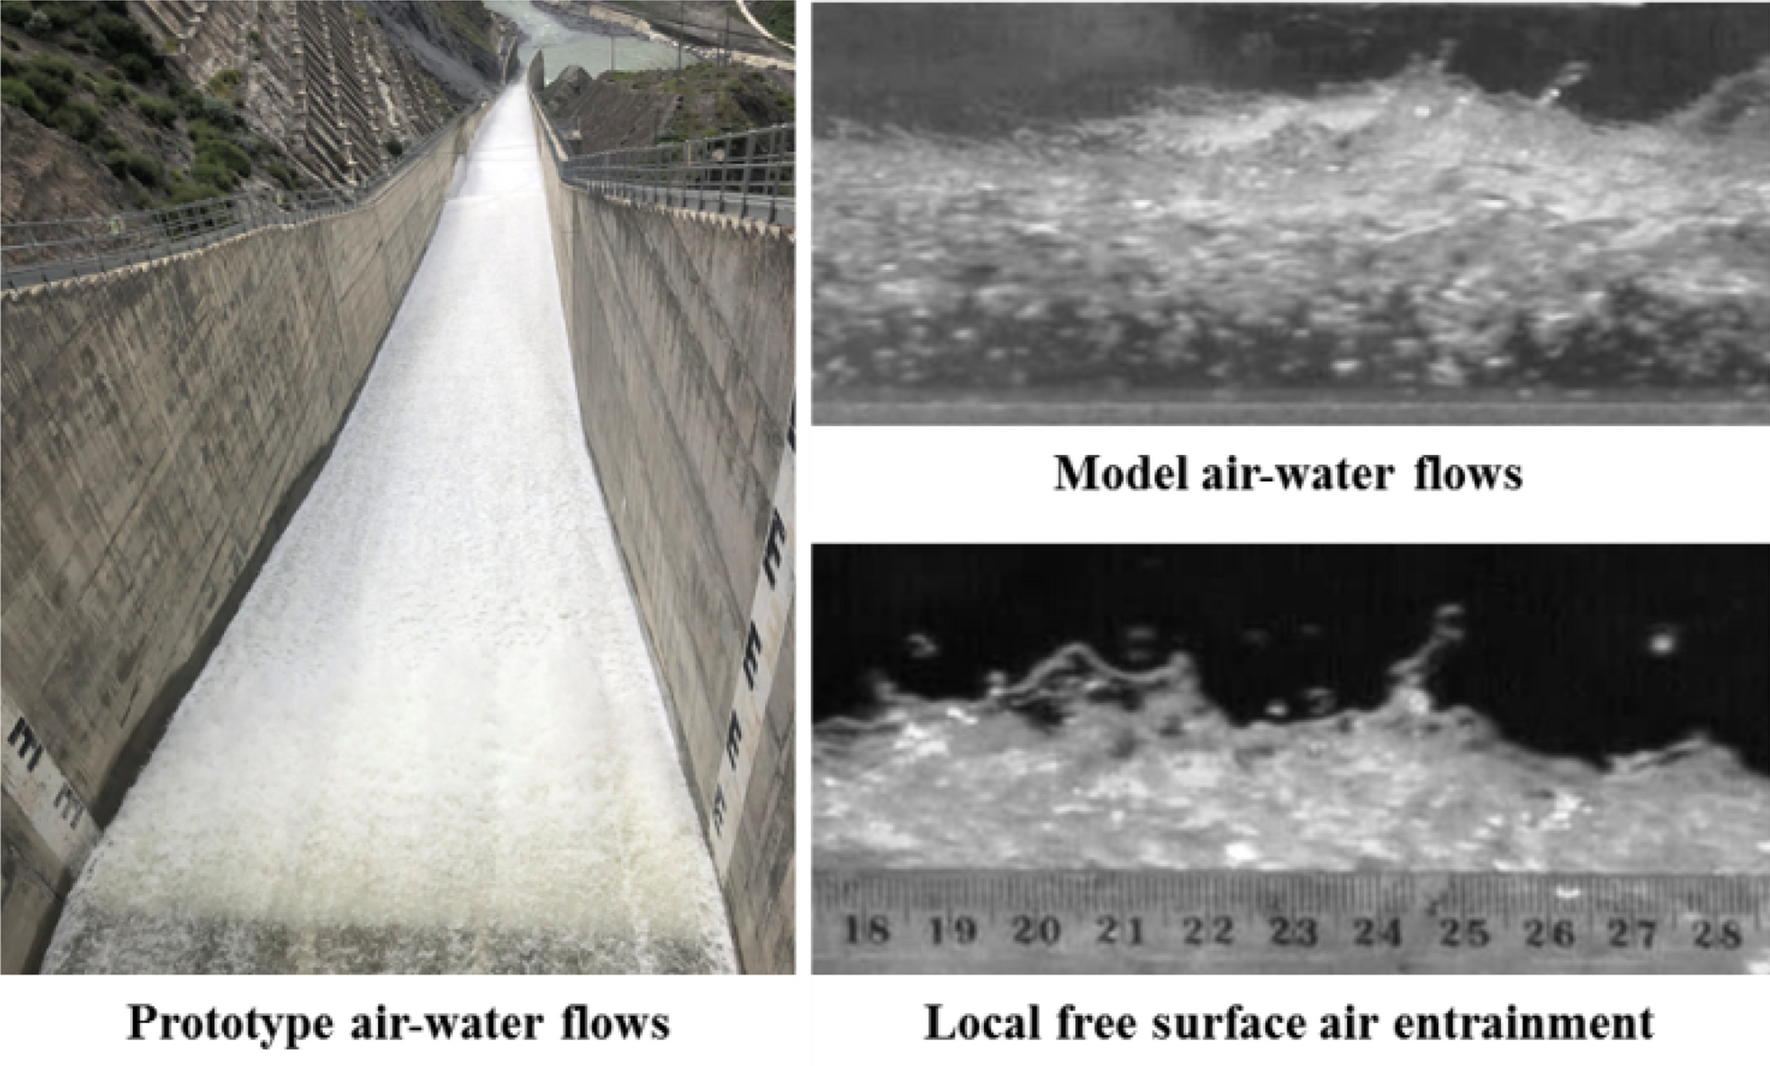 Free surface aeration and development dependence in chute flows |  Scientific Reports